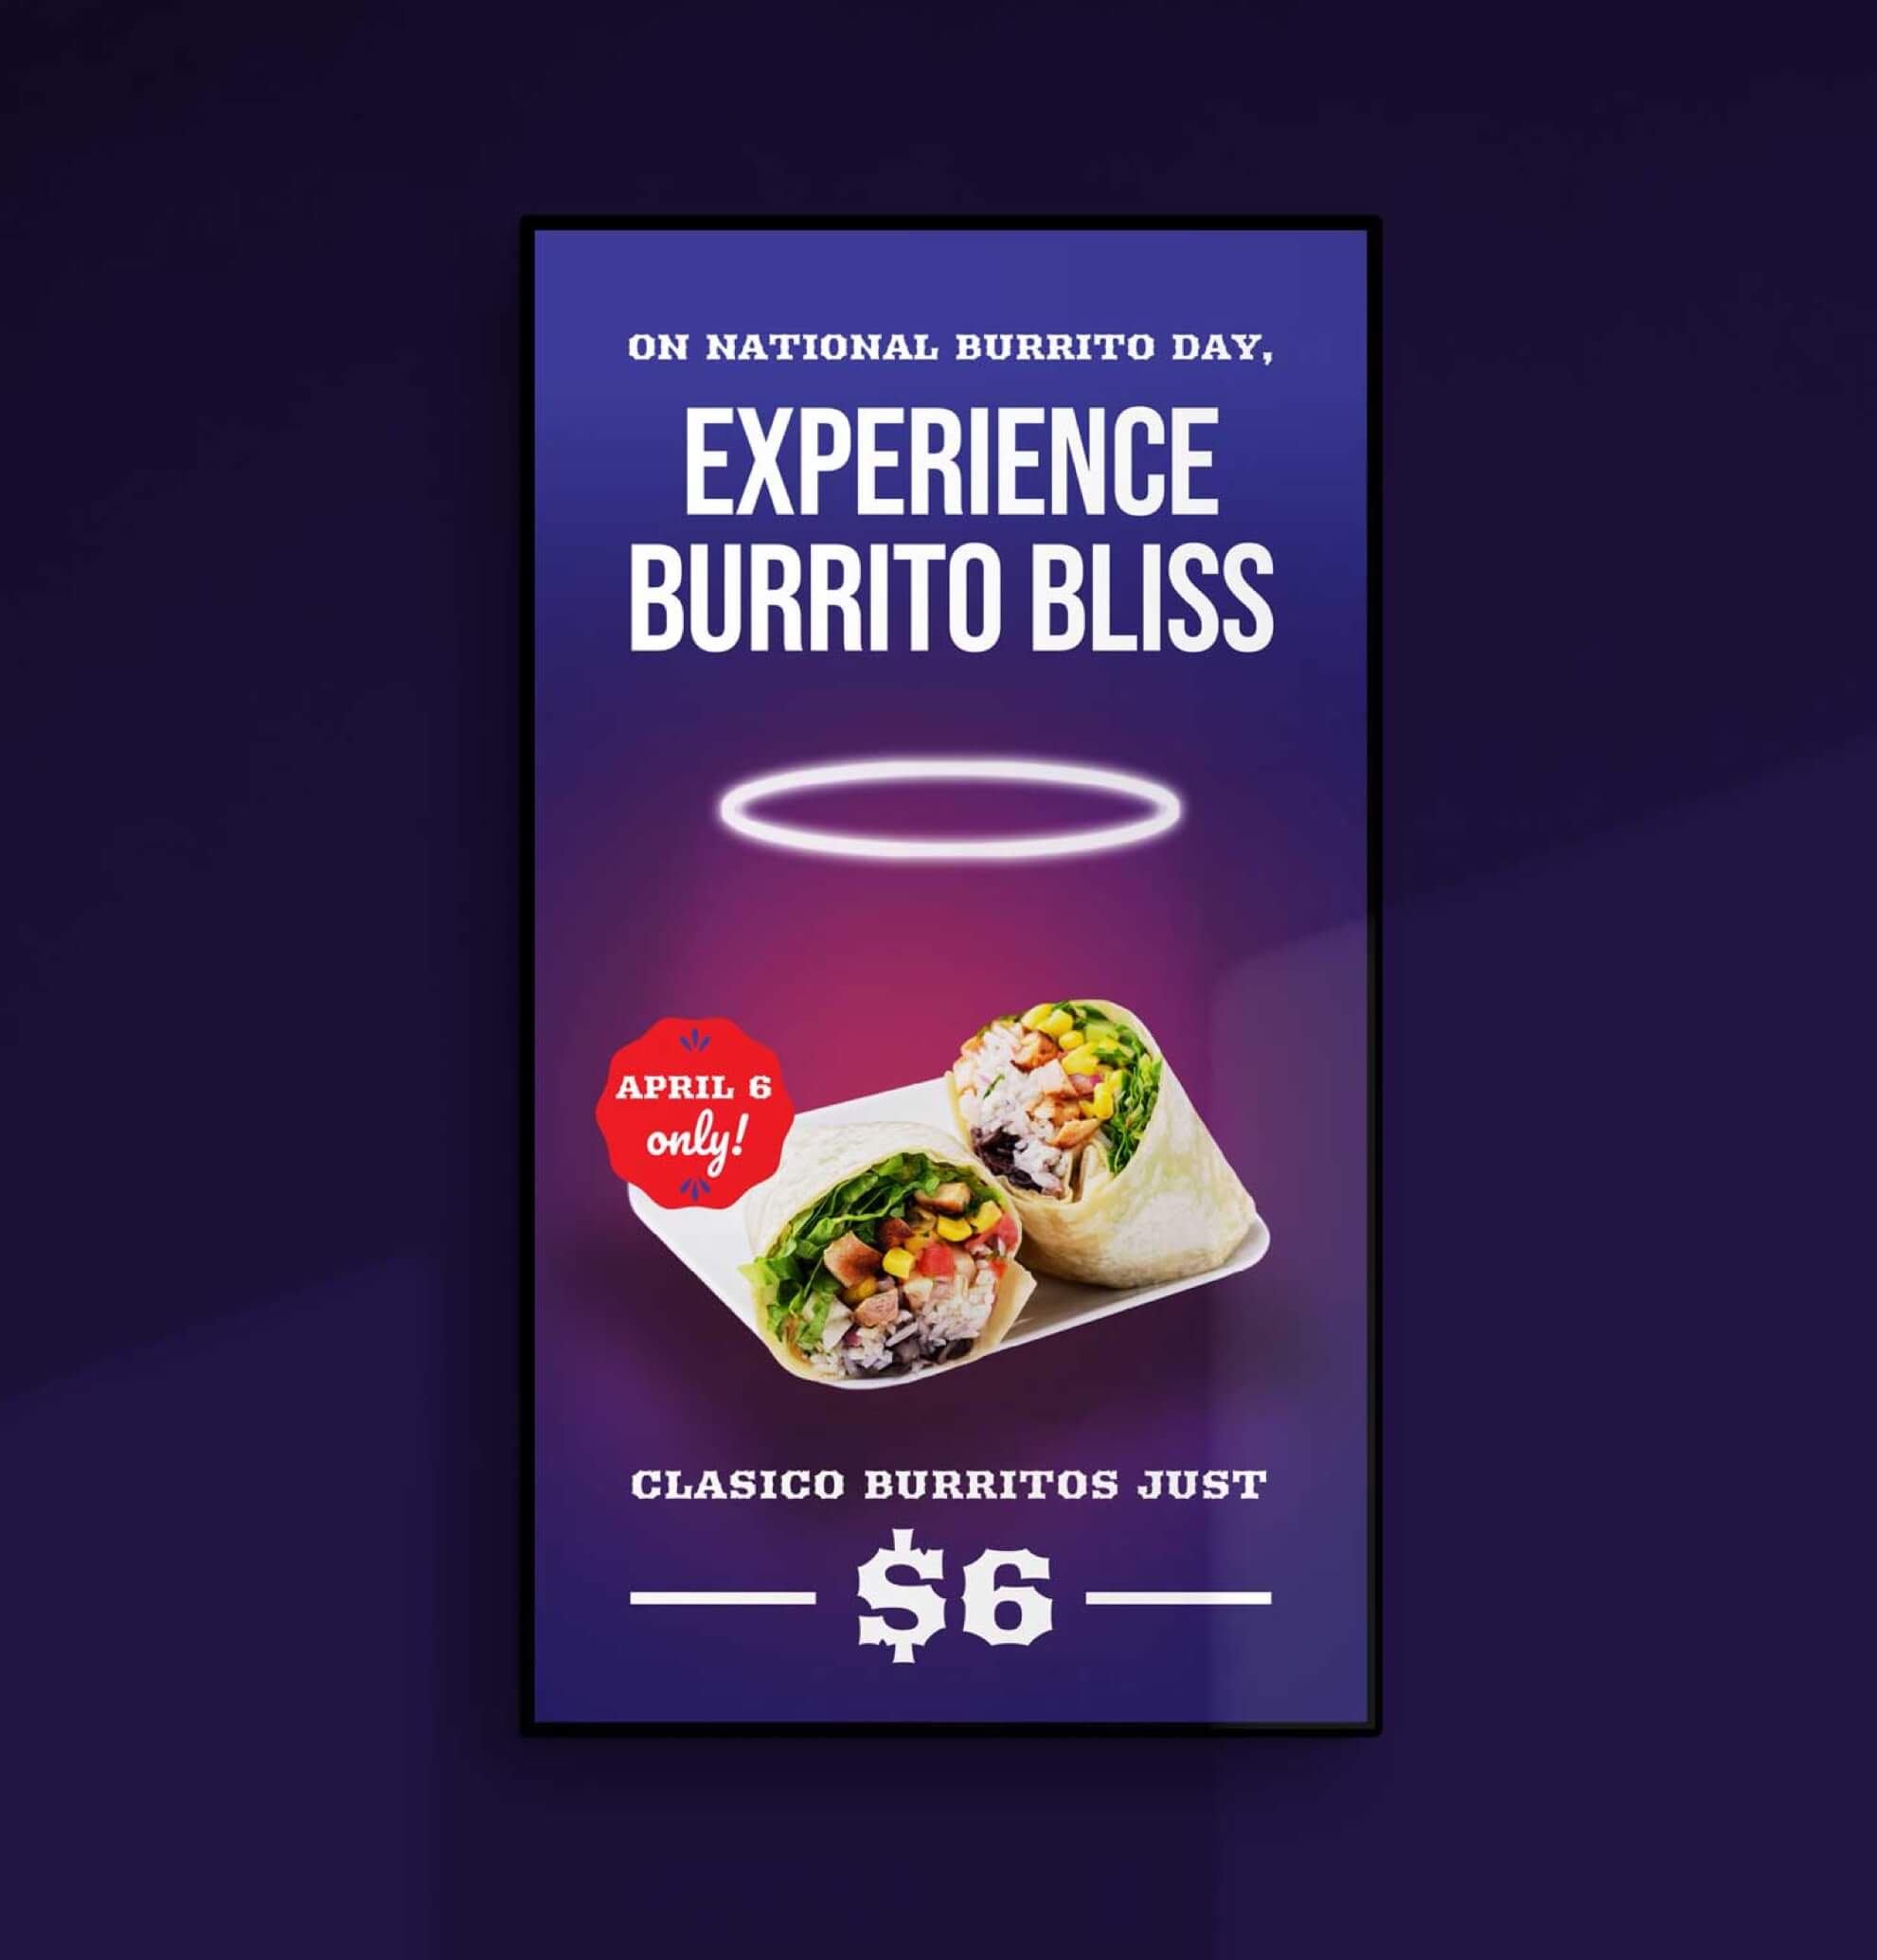 On National Burrito Day, Experience Burrito Bliss. April 6th Only. Clasico Burritos just $6